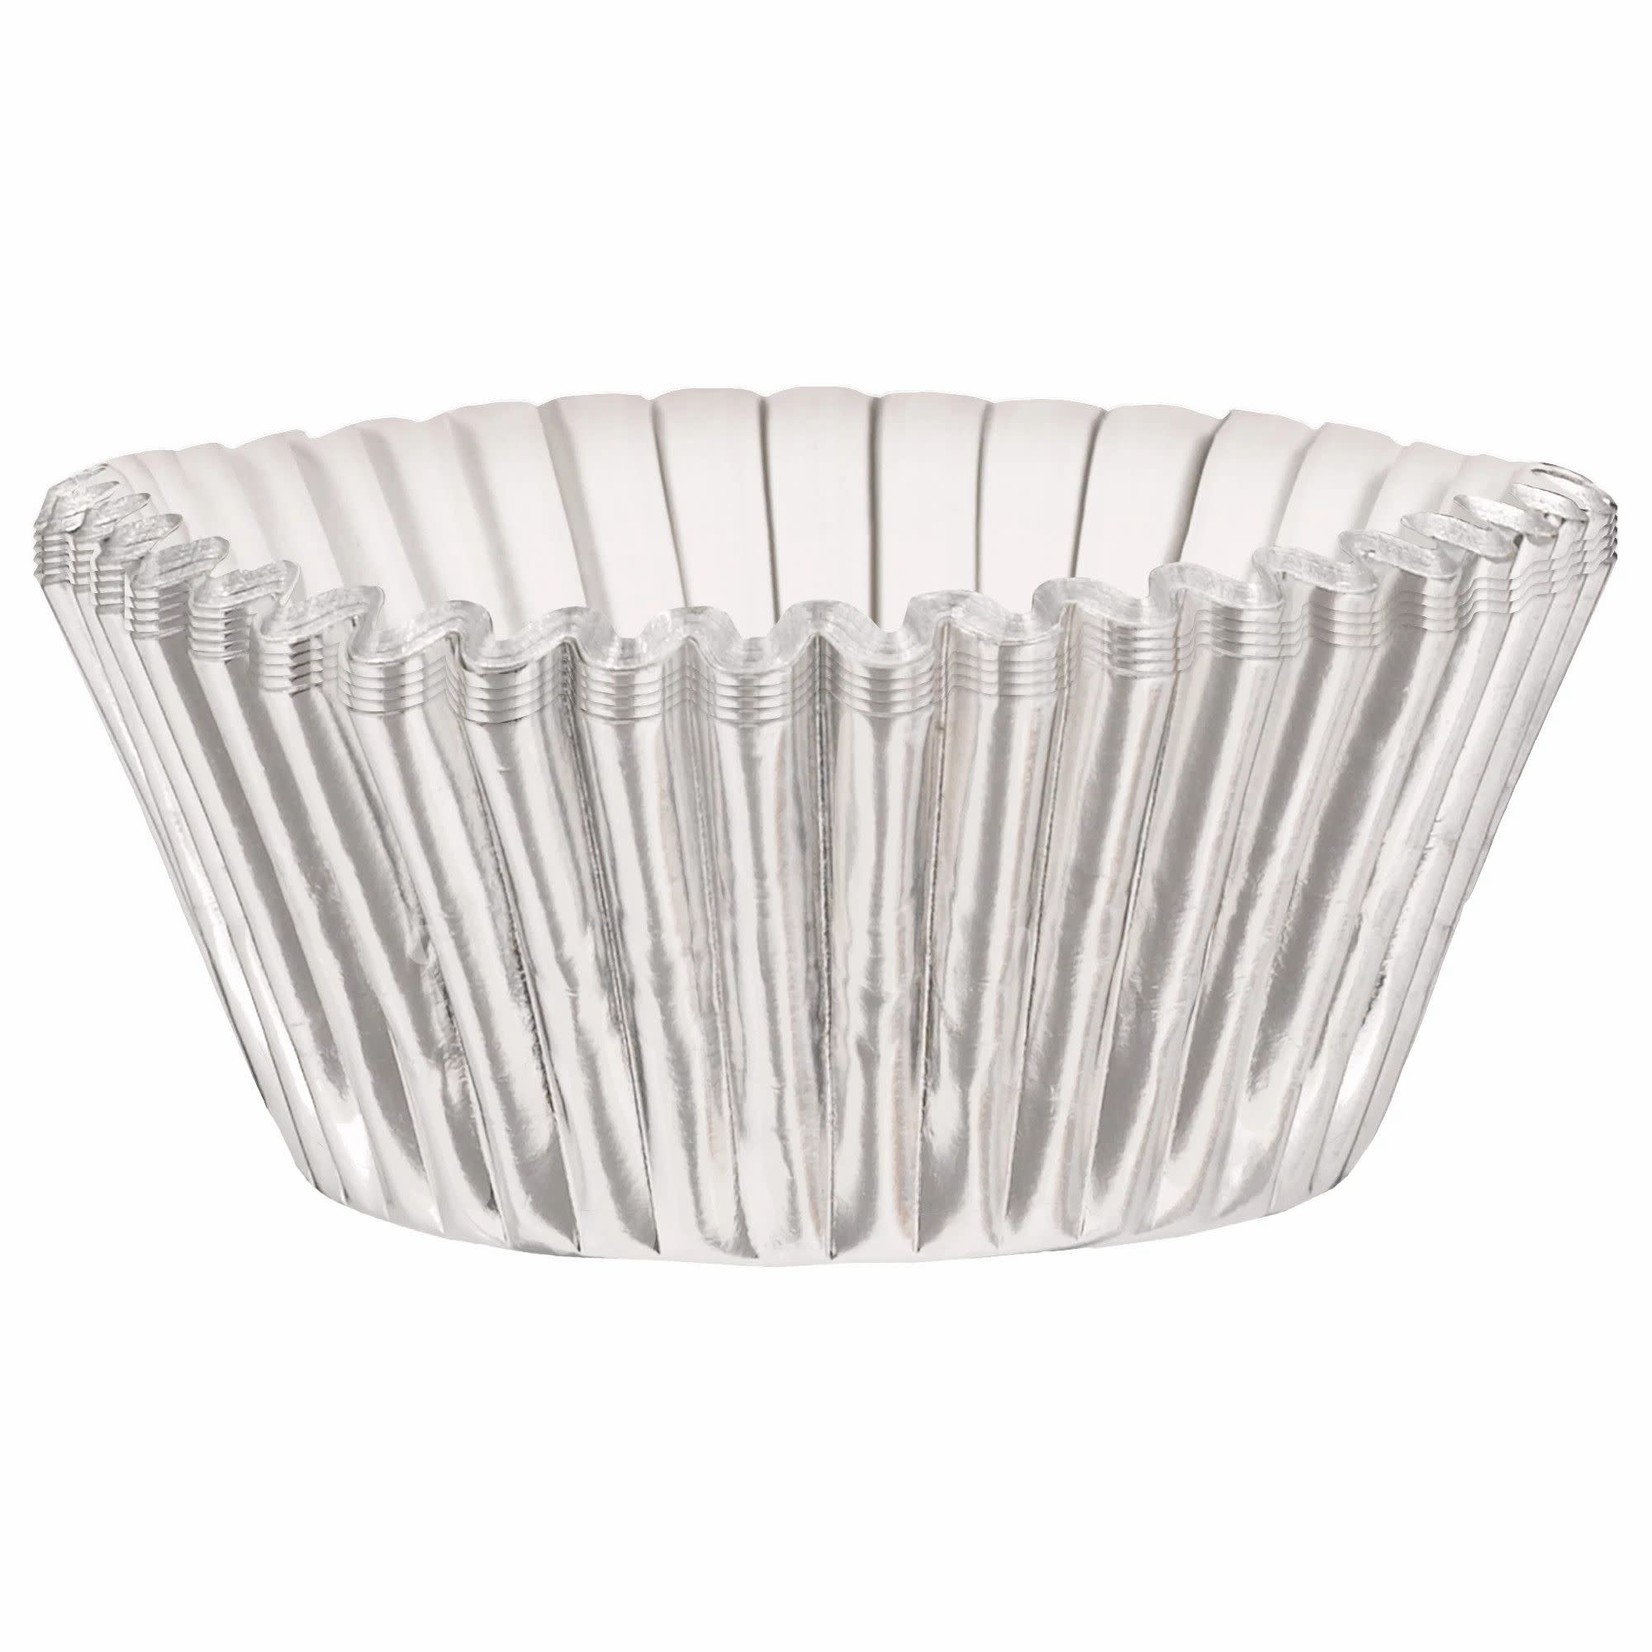 Amscan 2" Silver Foil Baking Cups - 24ct.